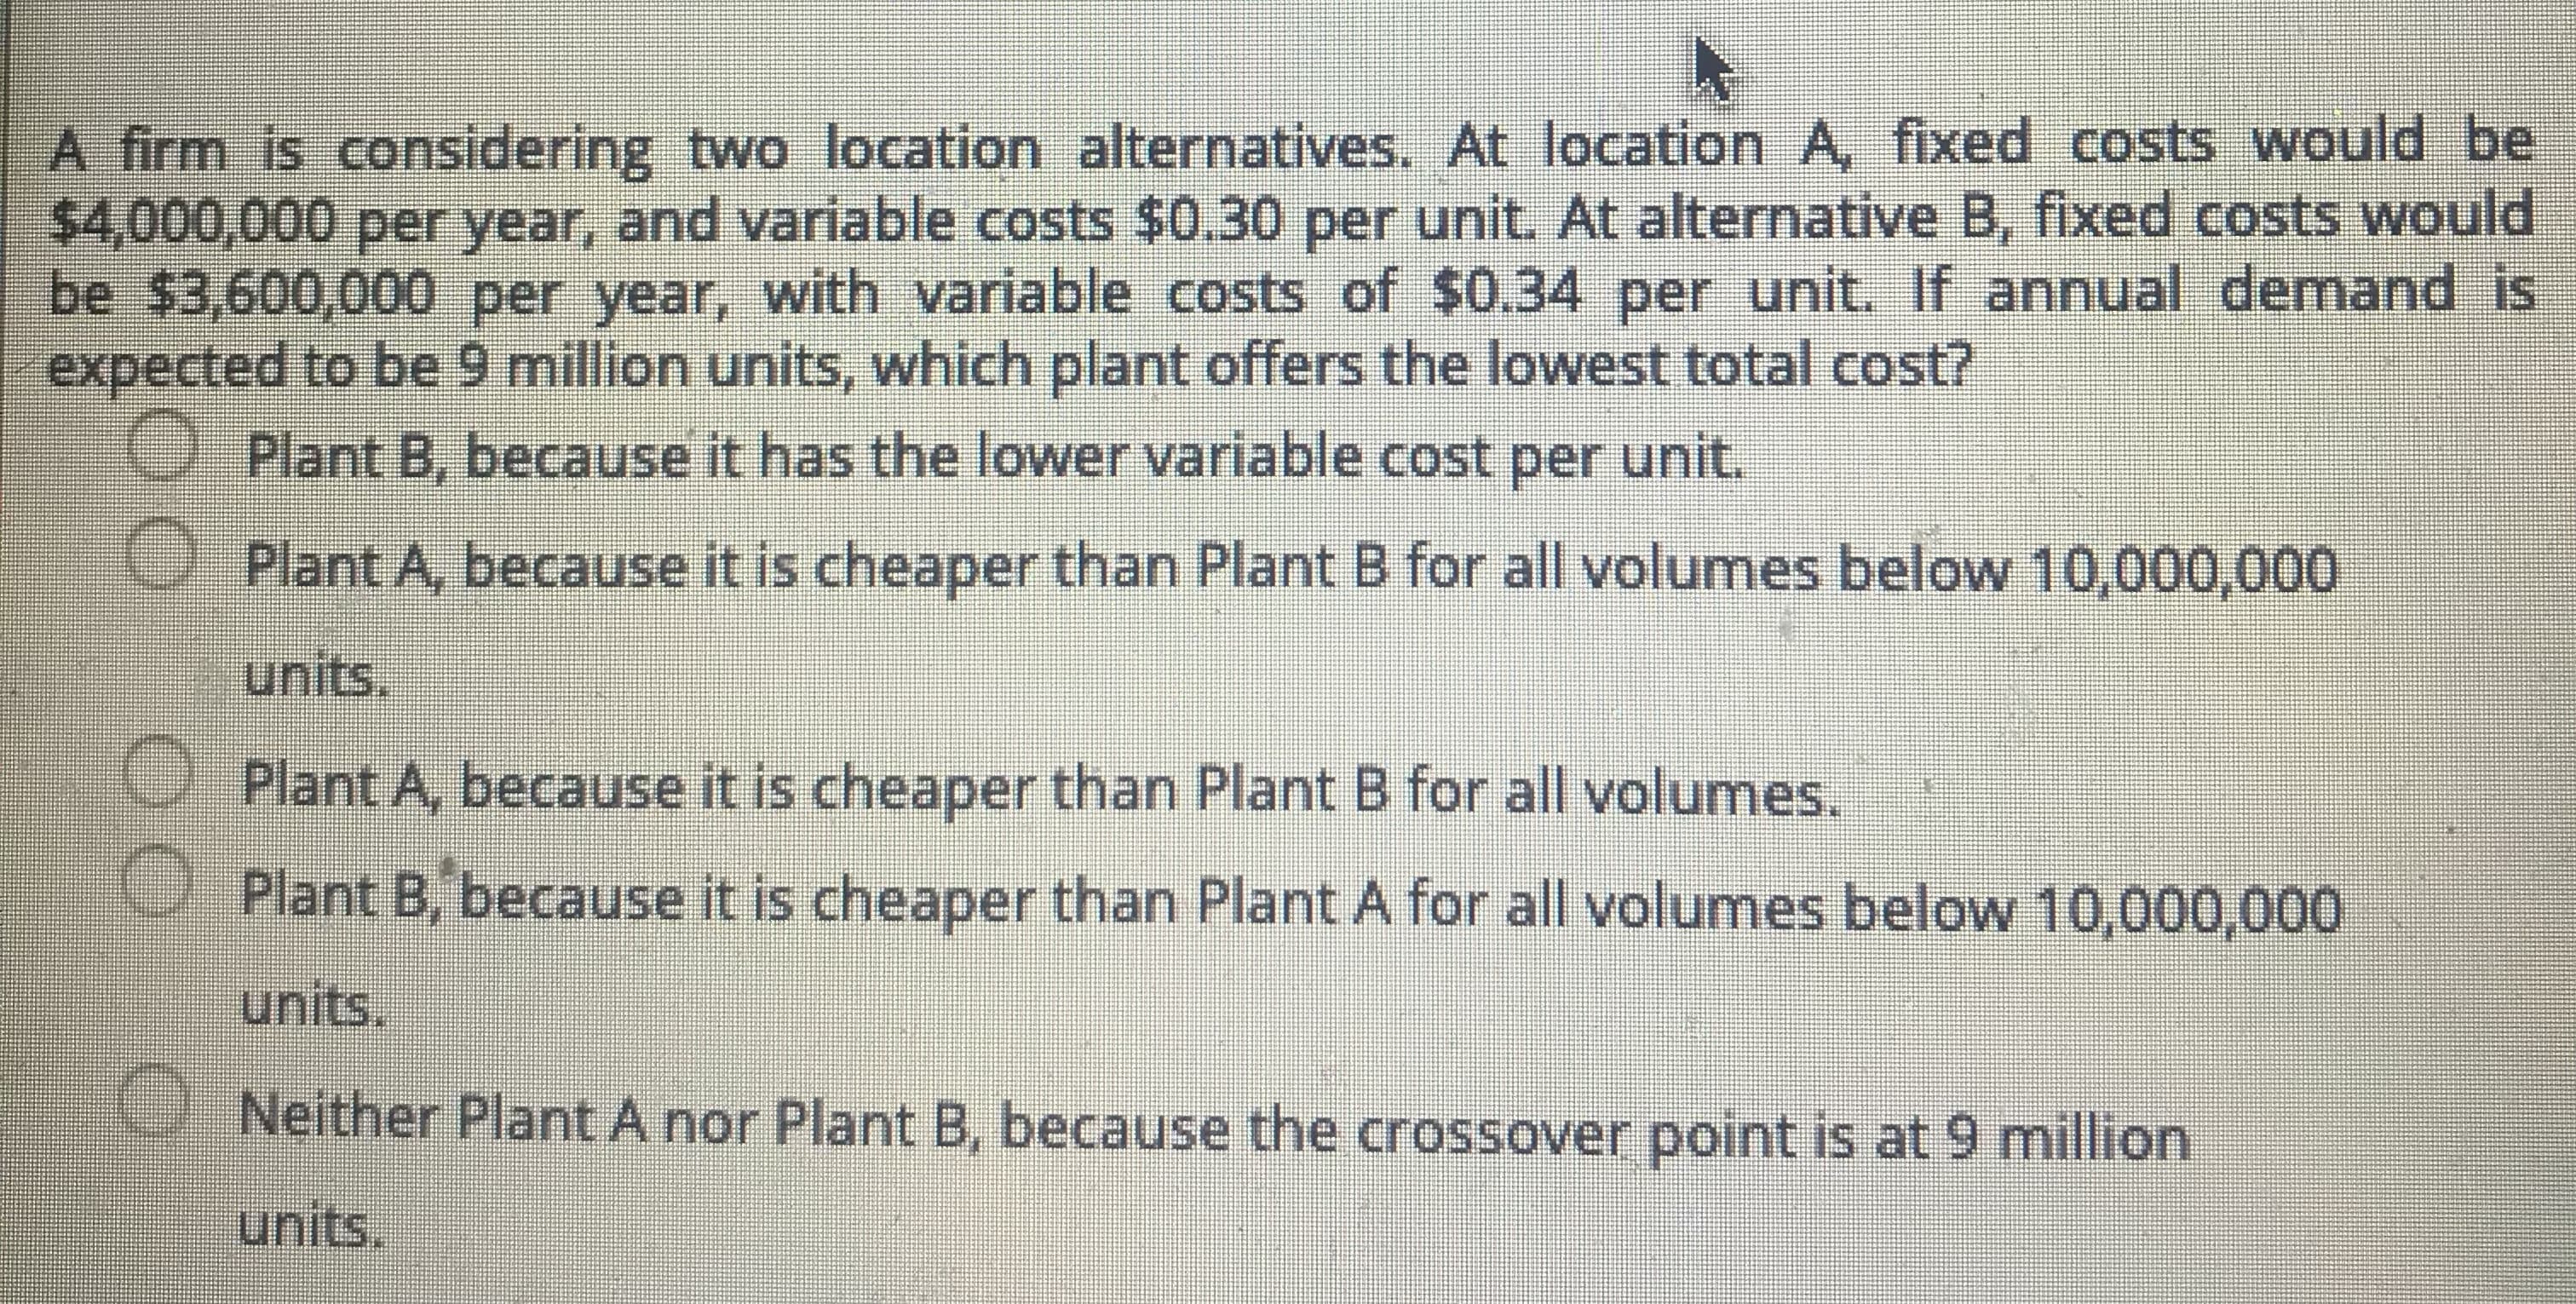 A firm is considering two location alternatives. At location A, fixed costs would be
$4,000,000 per year, and variable costs $0.30 per unit. At alternative B, fixed costs would
be $3,600,000 per year, with variable costs of $0.34 per unit. If annual demand is
expected to be 9 million units, which plant offers the lowest total cost?
Plant B, because it has the lower variable cost per unit.
Plant A, because it is cheaper than Plant B for all volumes below 10,000,000
units.
Plant A, because it is cheaper than Plant B for all volumes.
Plant B, because it is cheaper than Plant A for all volumes below 10,000,000
units.
Neither Plant A nor Plant B, because the crossover point is at 9 million
units.
